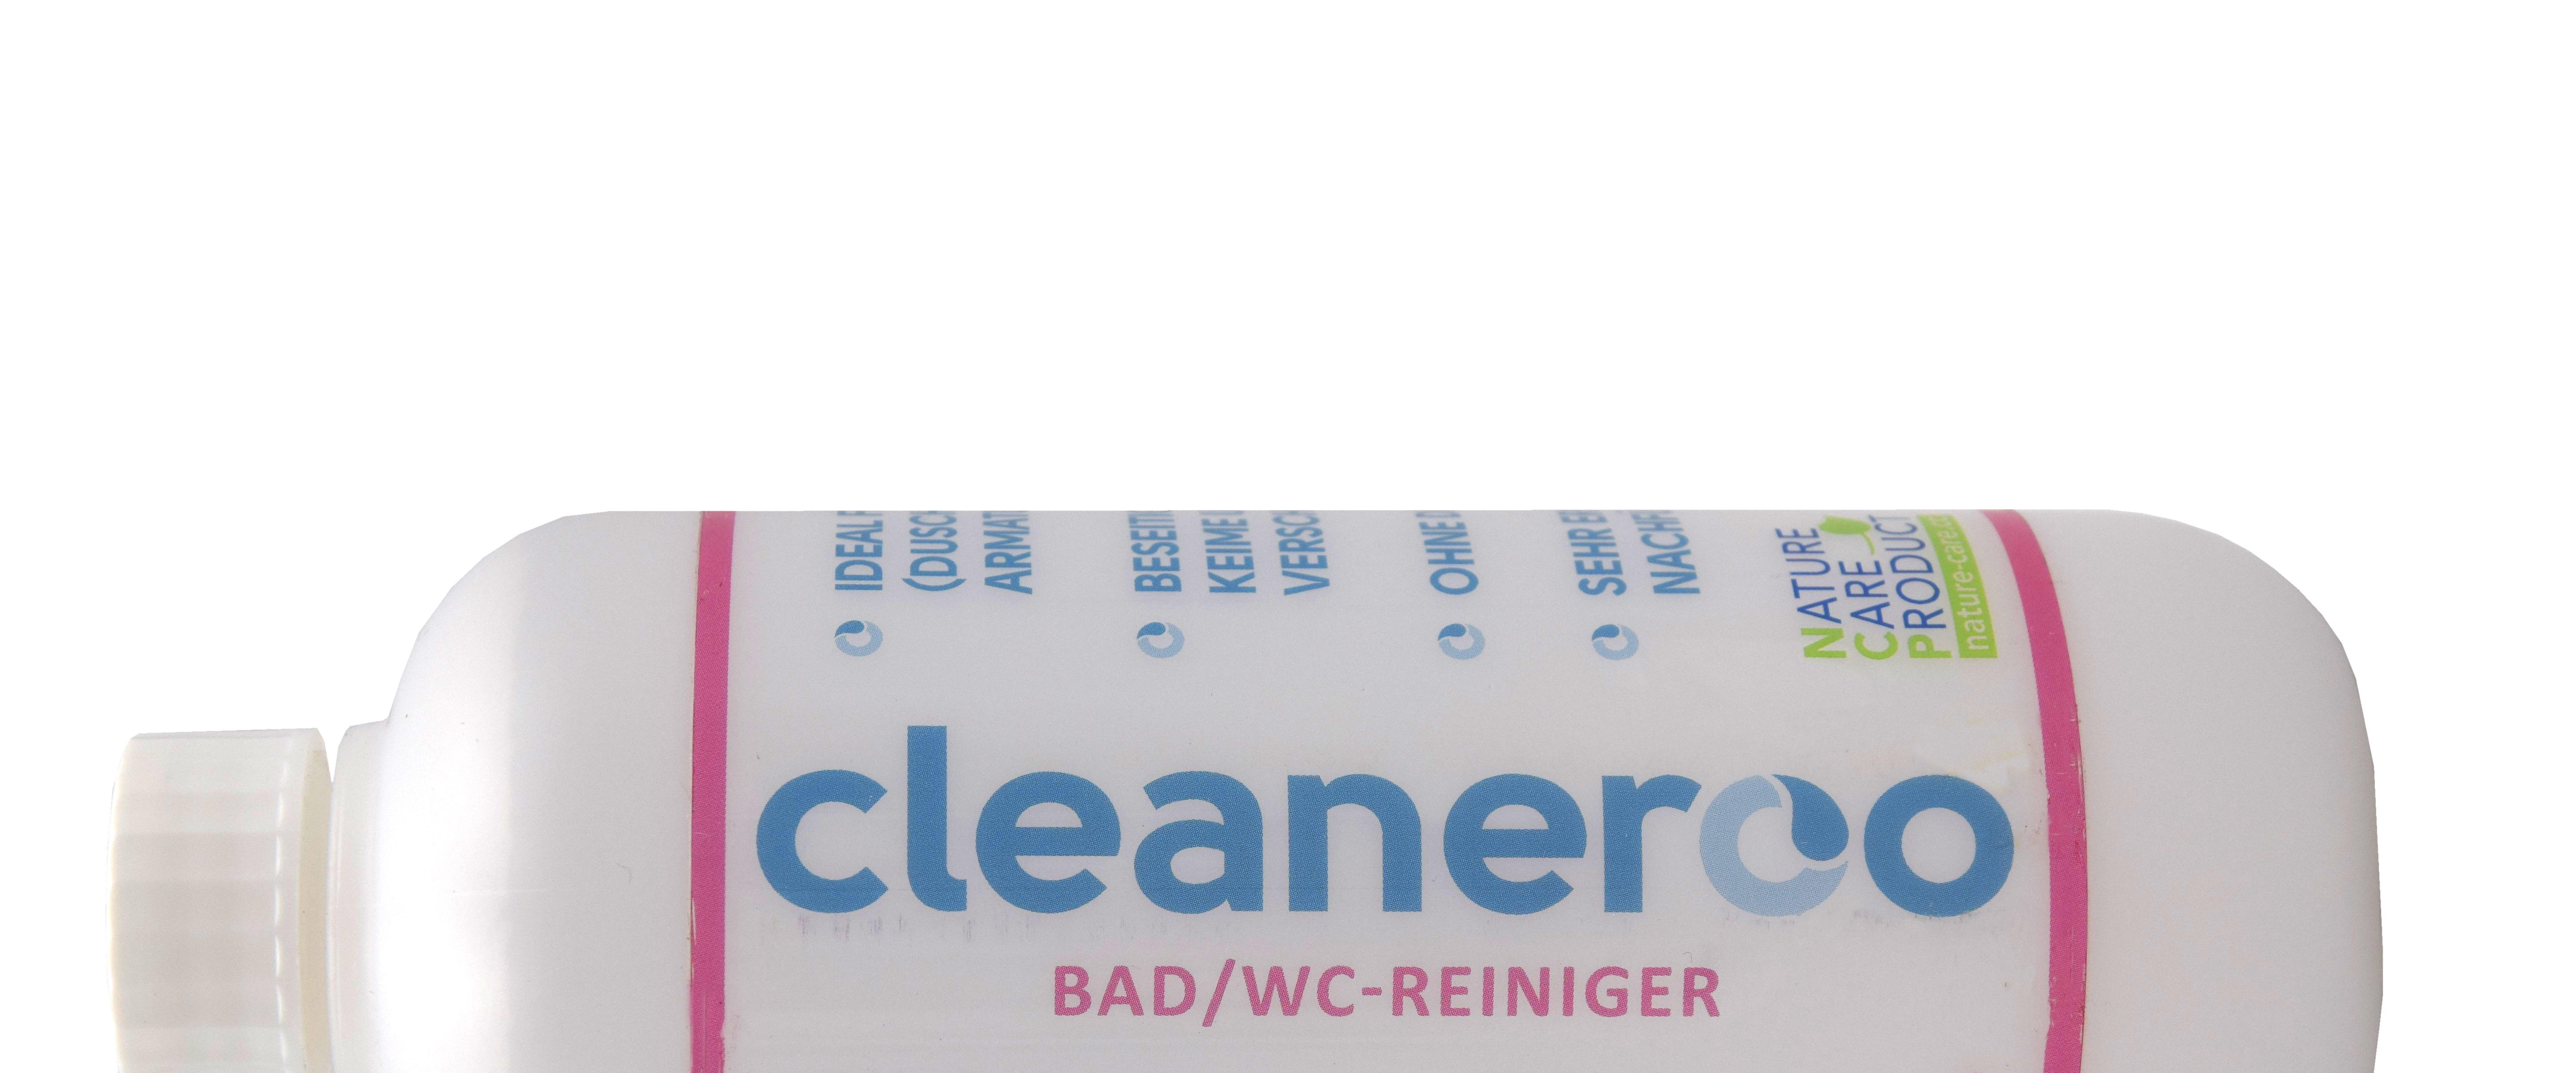 cleaneroo Bad- / WC Reiniger (rot) 